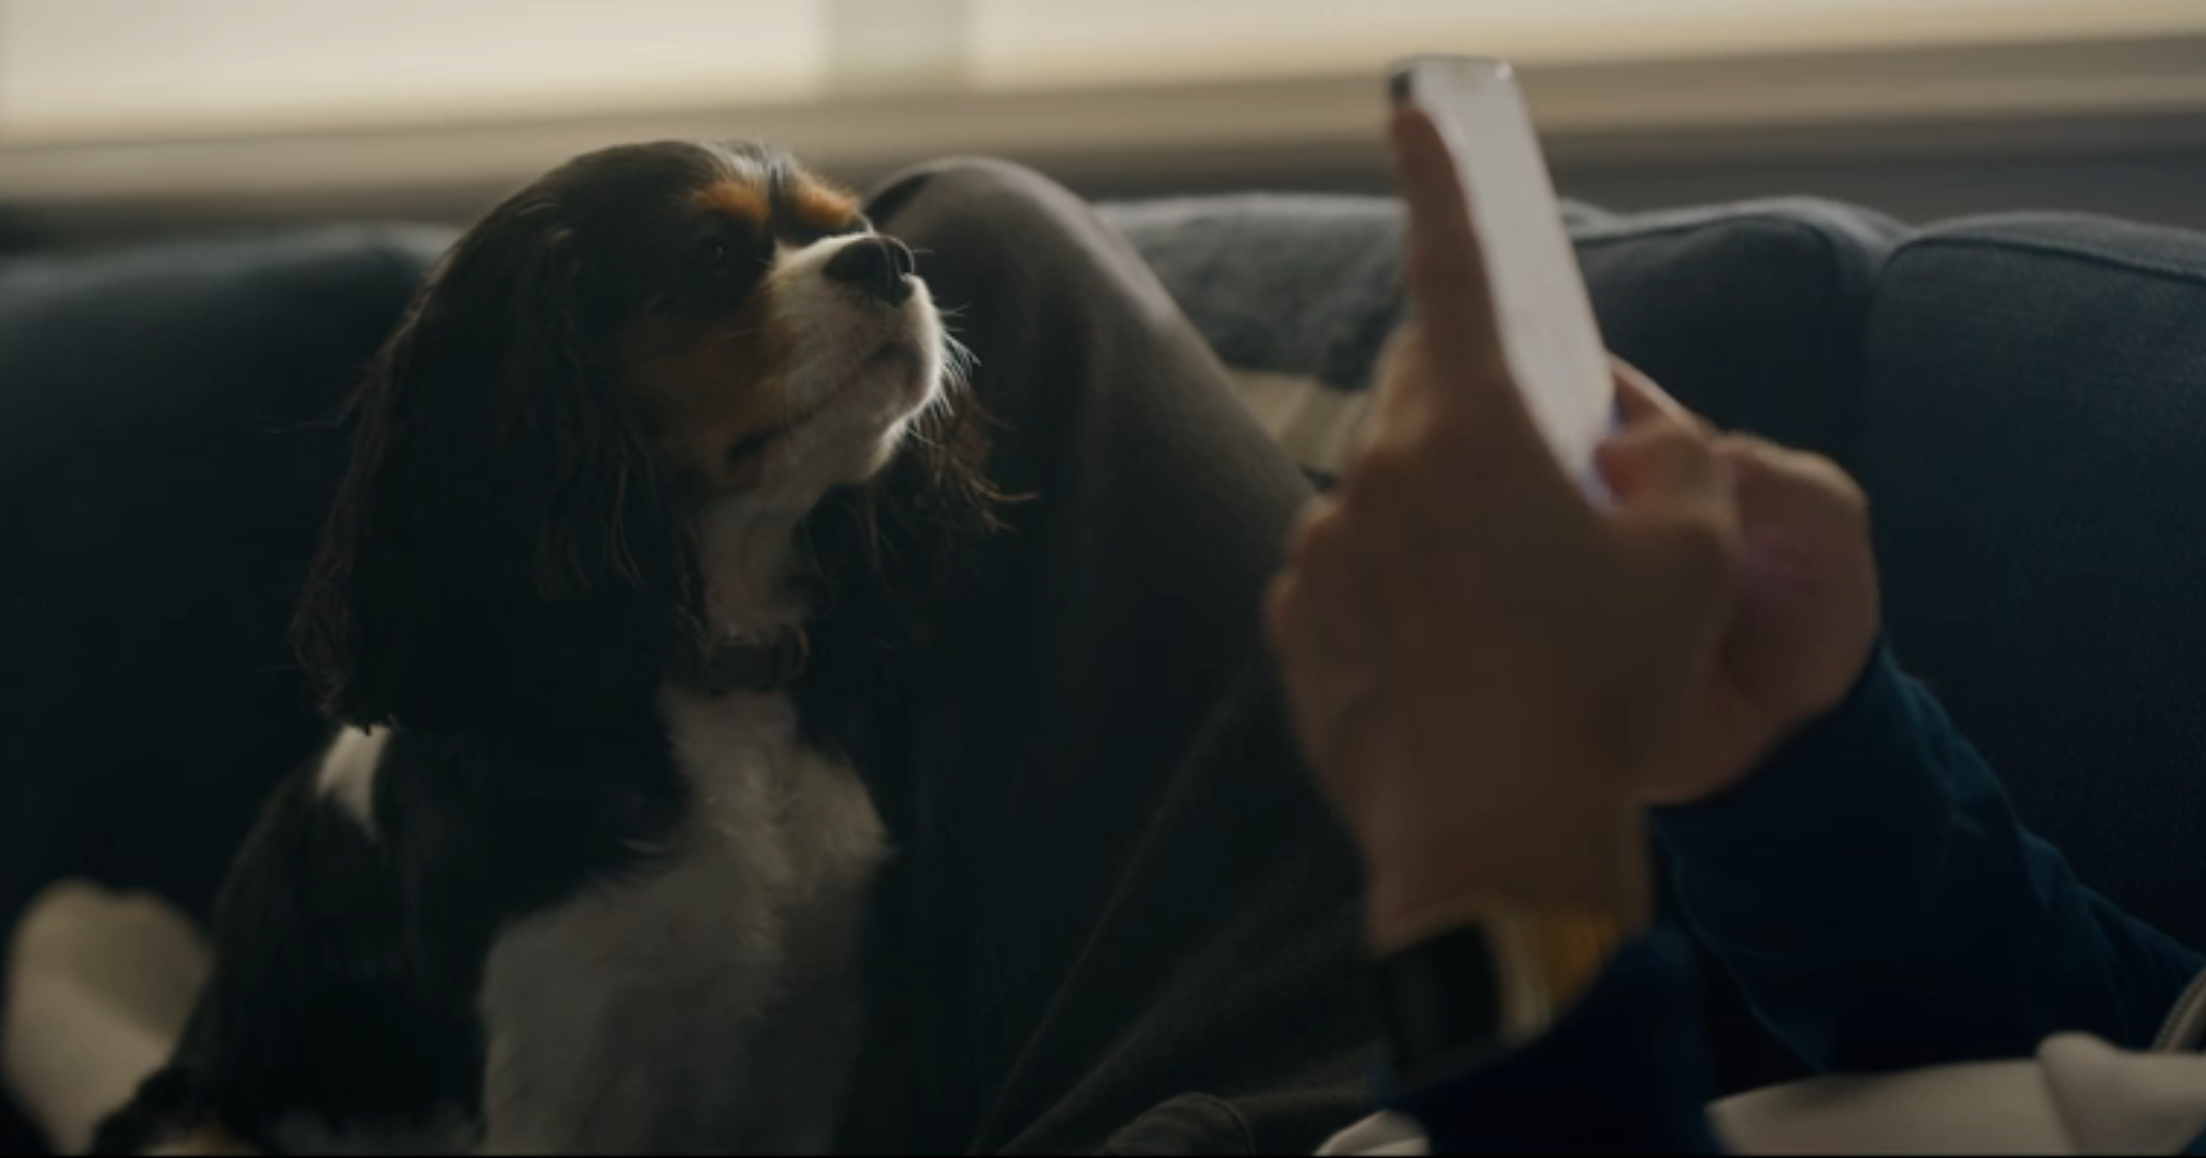 cavalier spaniel watching owner texting